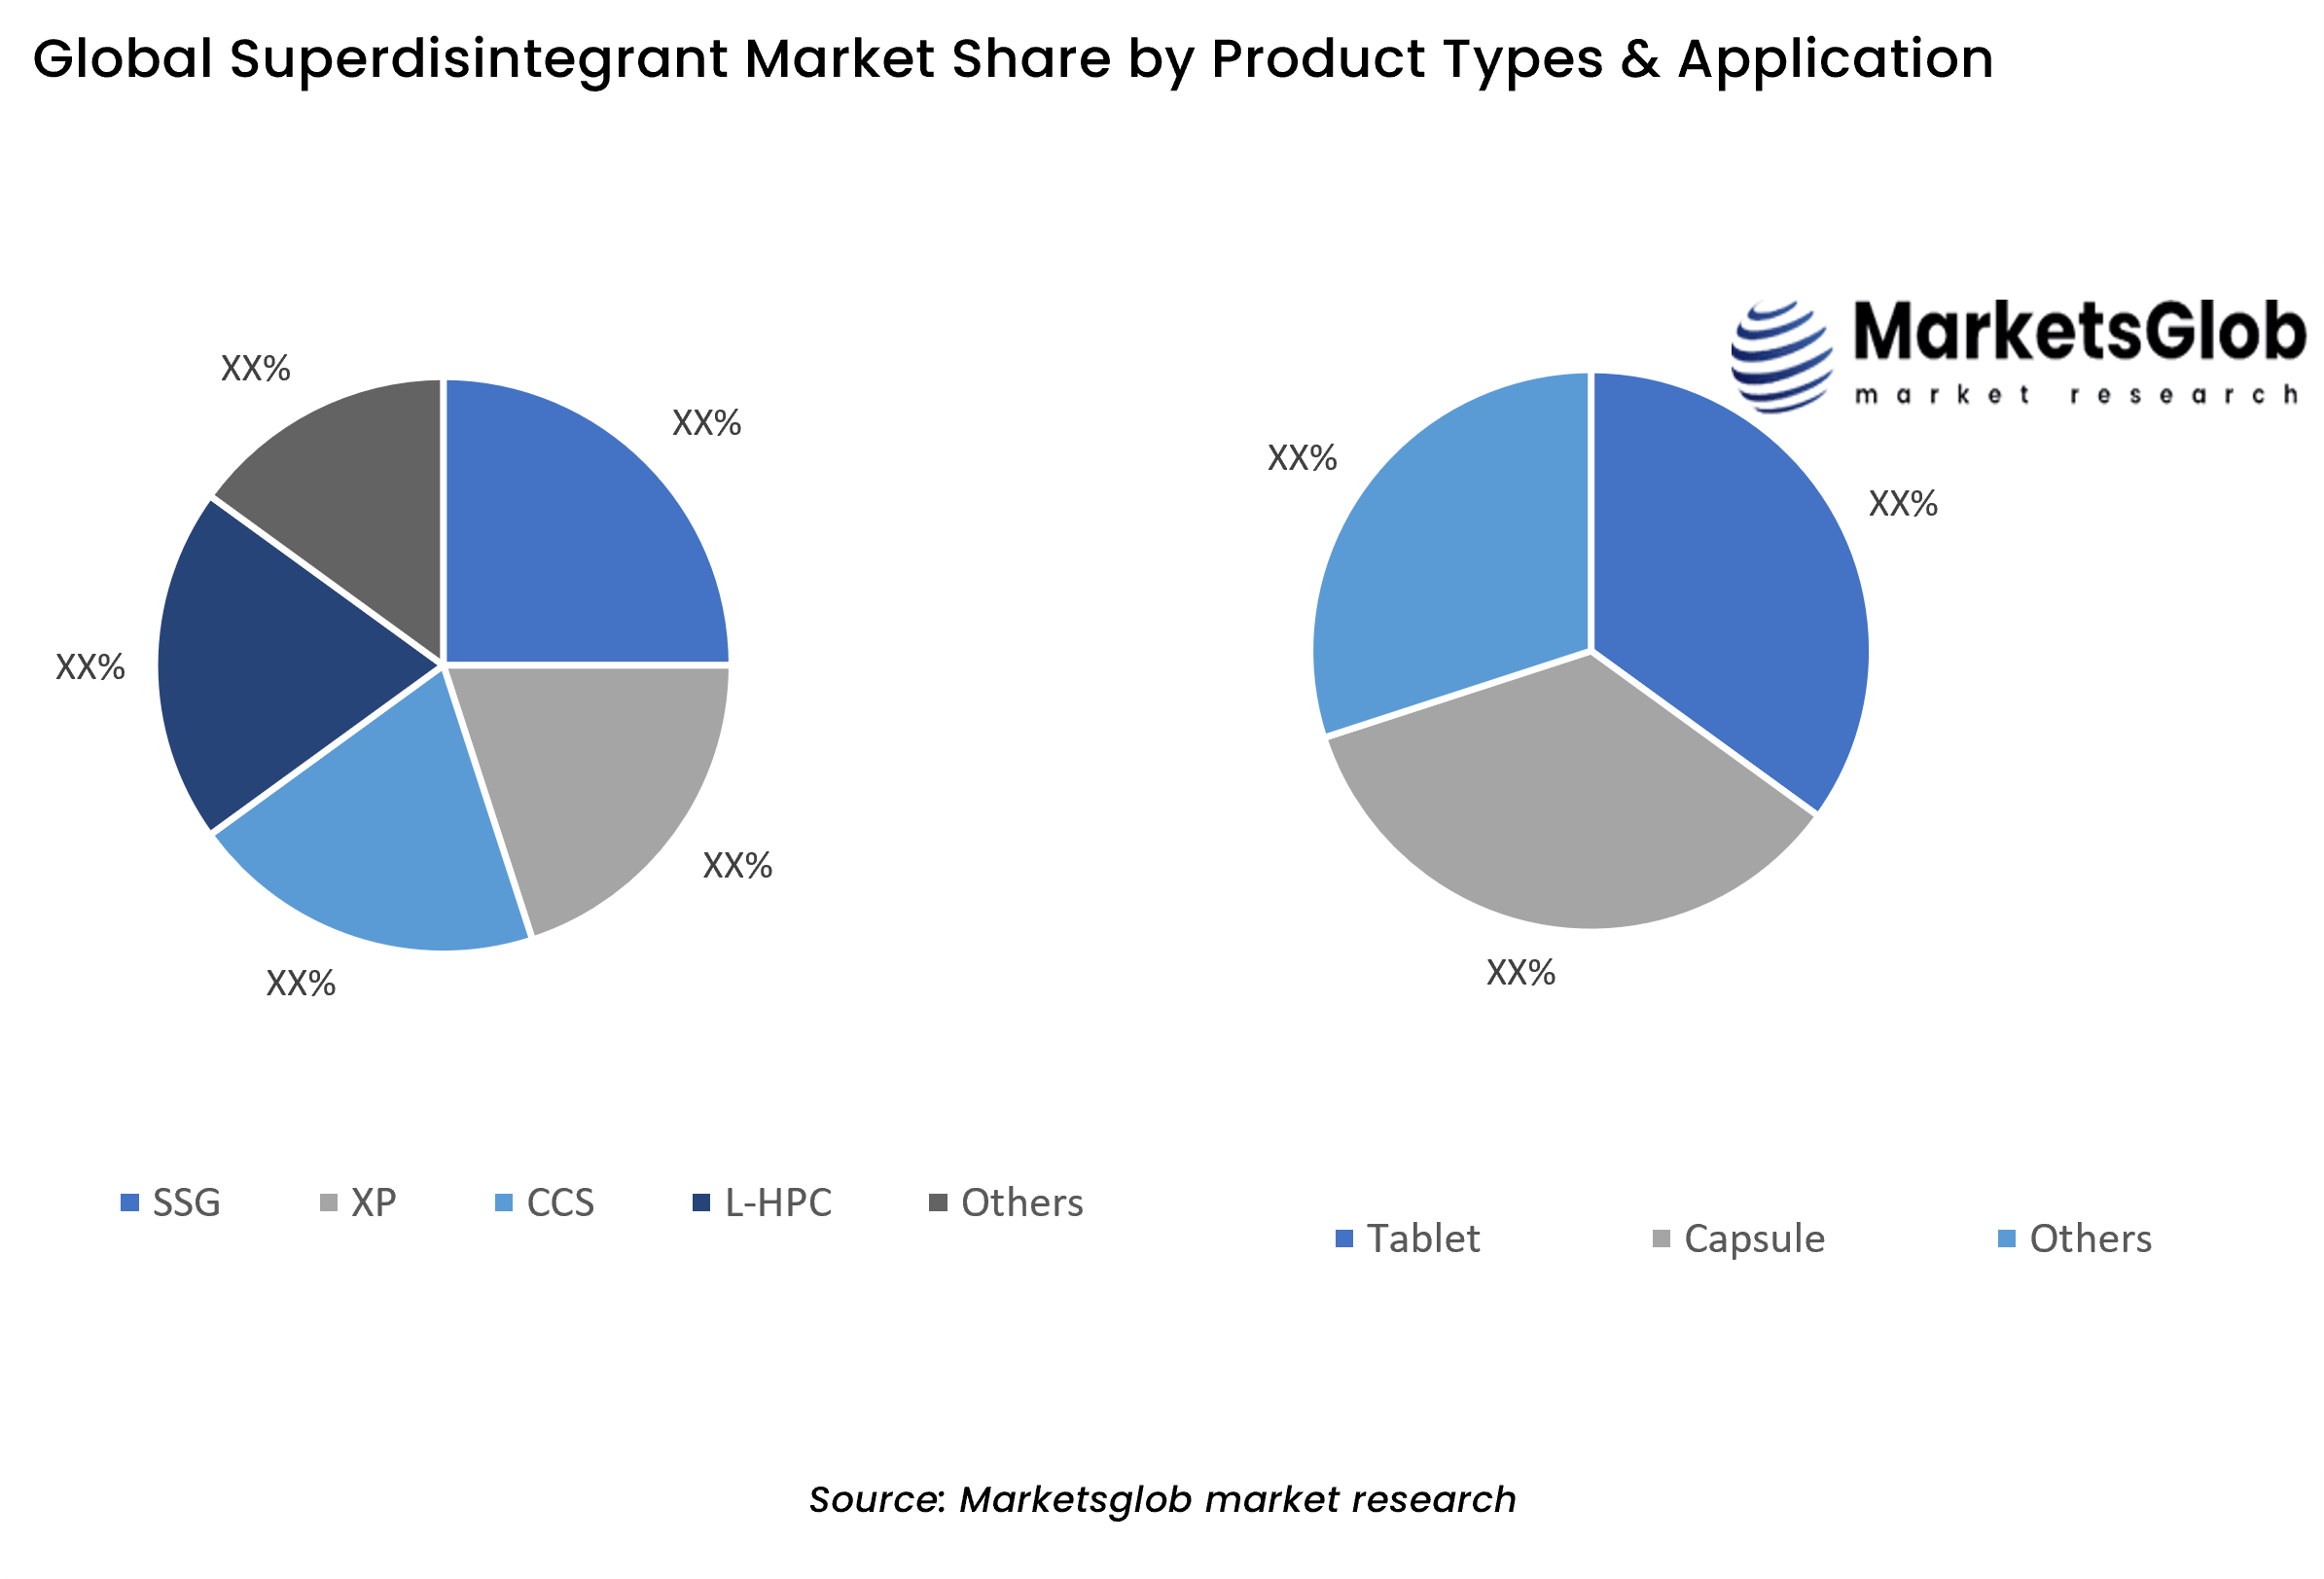 Superdisintegrant Share by Product Types & Application